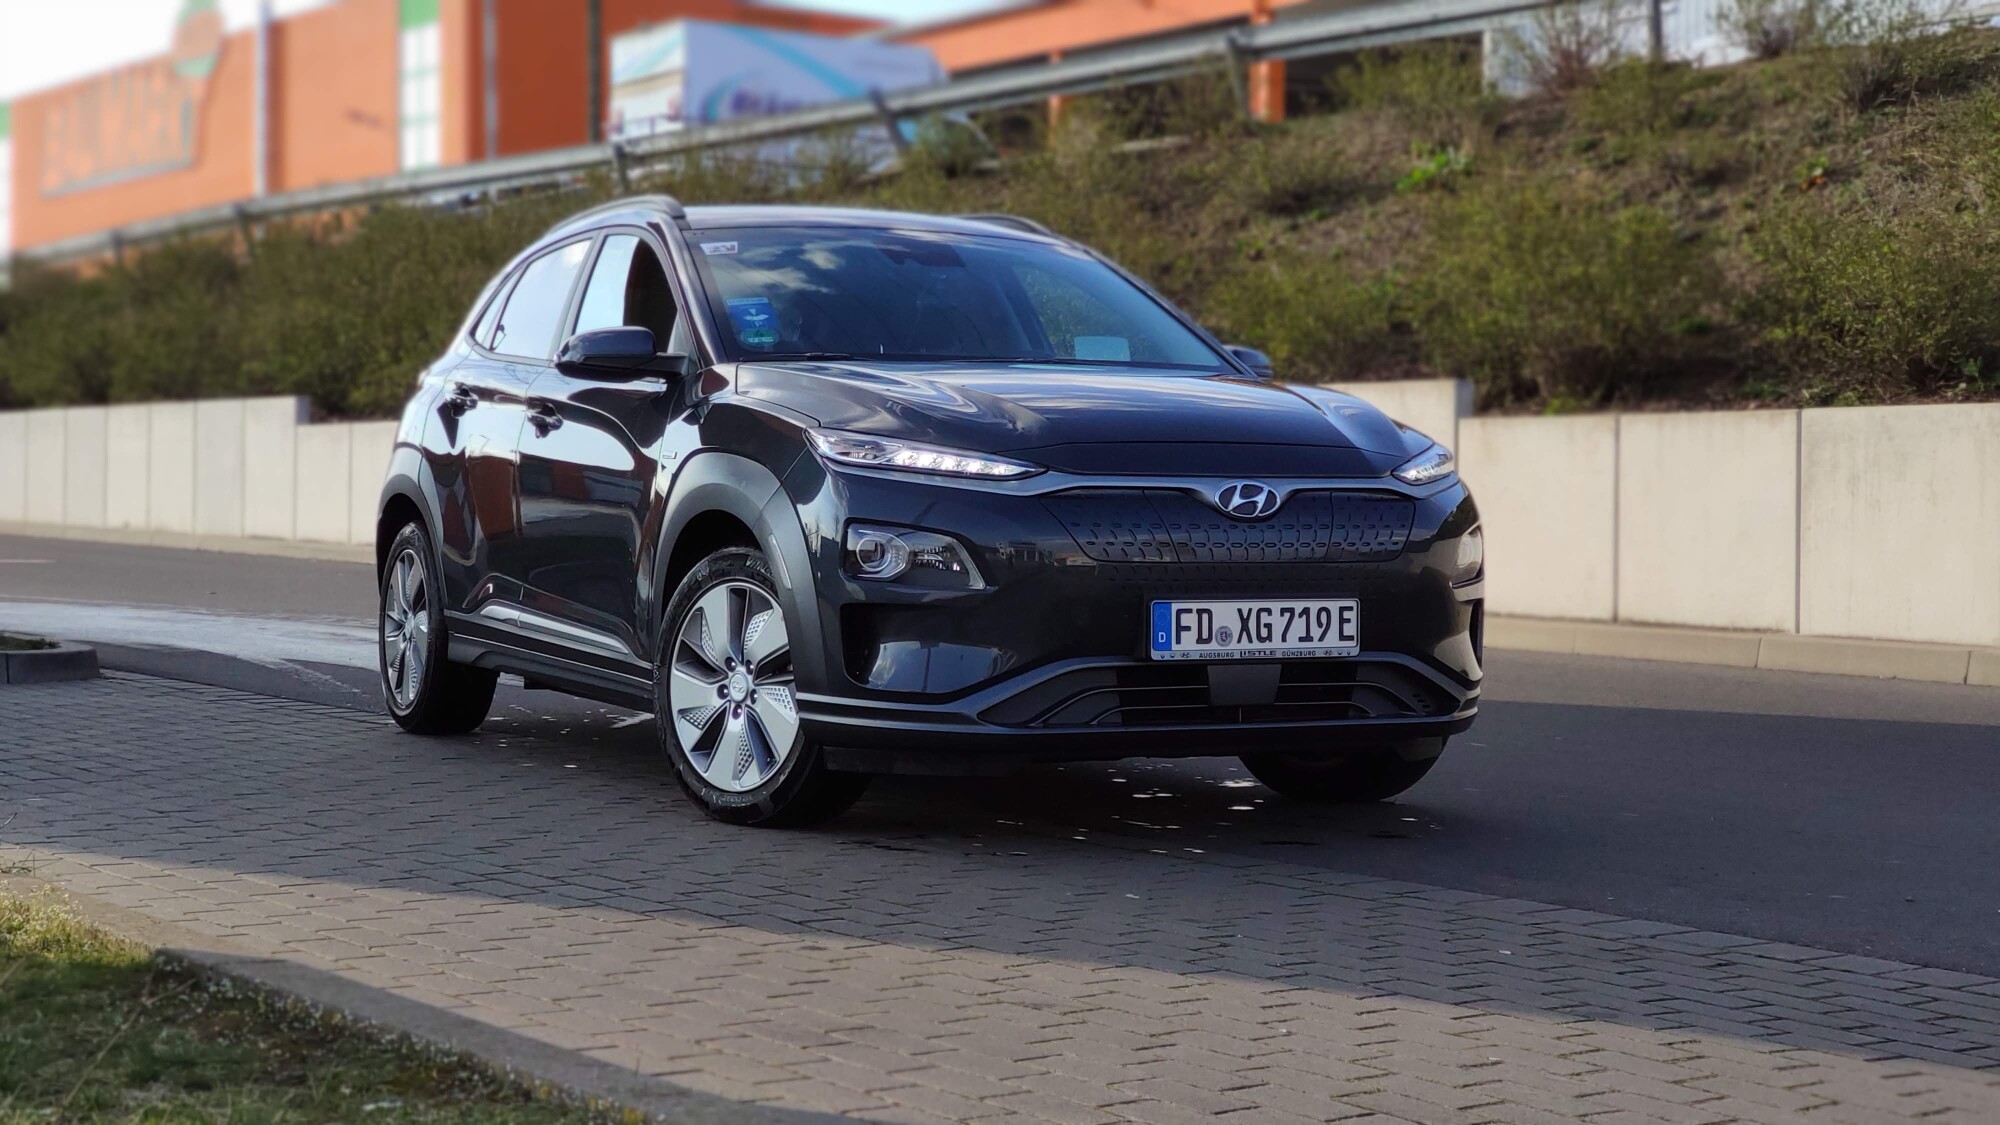 What You Need To Know About The Hyundai Kona Electric - Taylor Hyundai